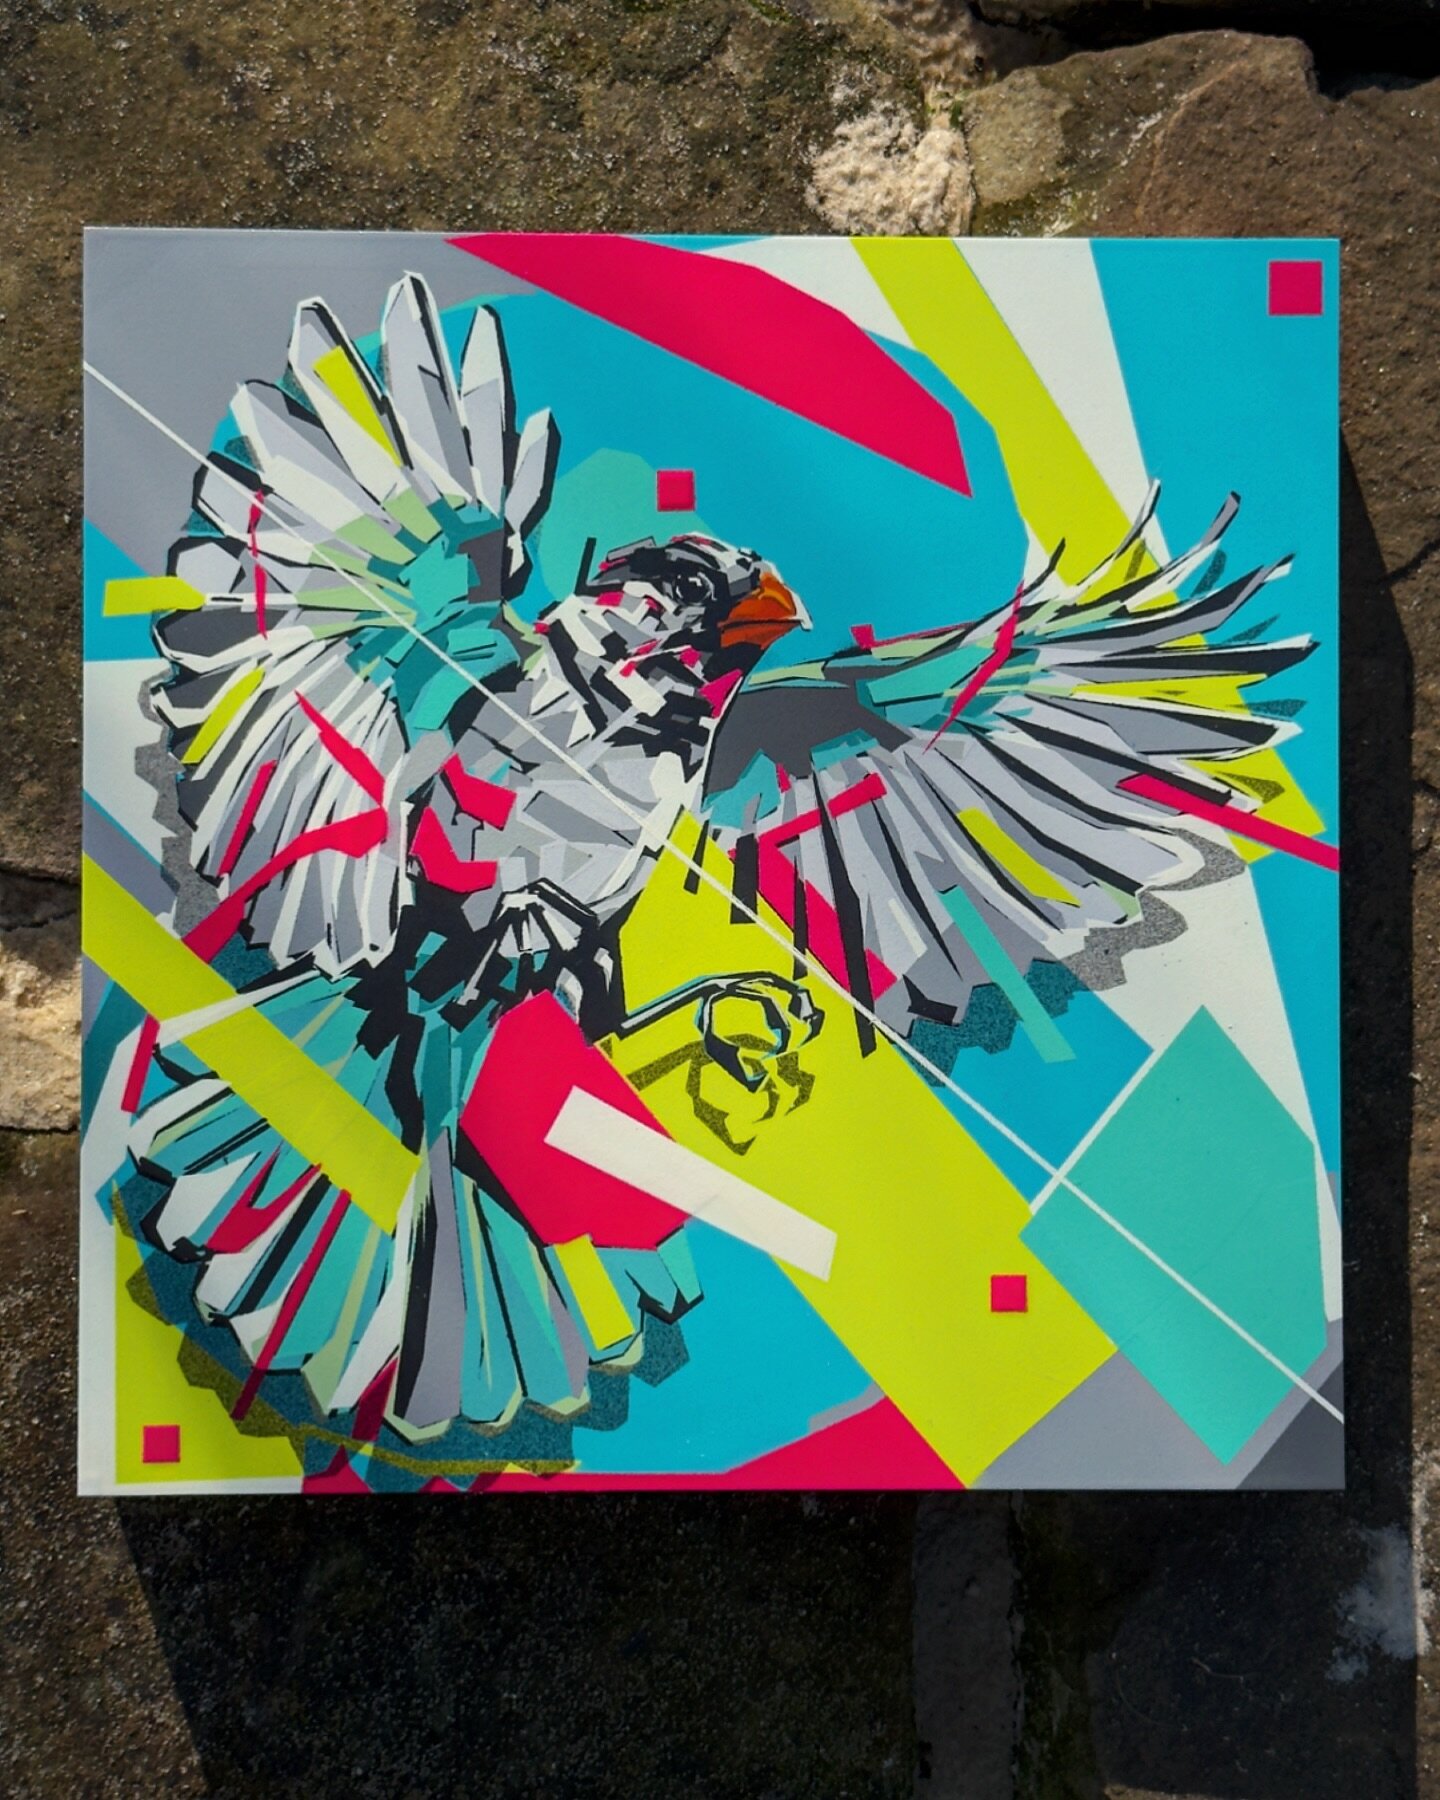 Flight &amp; Form

My contribution for a massive groupshow @ampersandshow at @knowngallery, stay tuned!

Spray Paint on wood

#fineart #art #gallery #newcontemporyart #contemporaryart #artshow #artgallery #artwork #artgallery #artoftheday #artwork #d